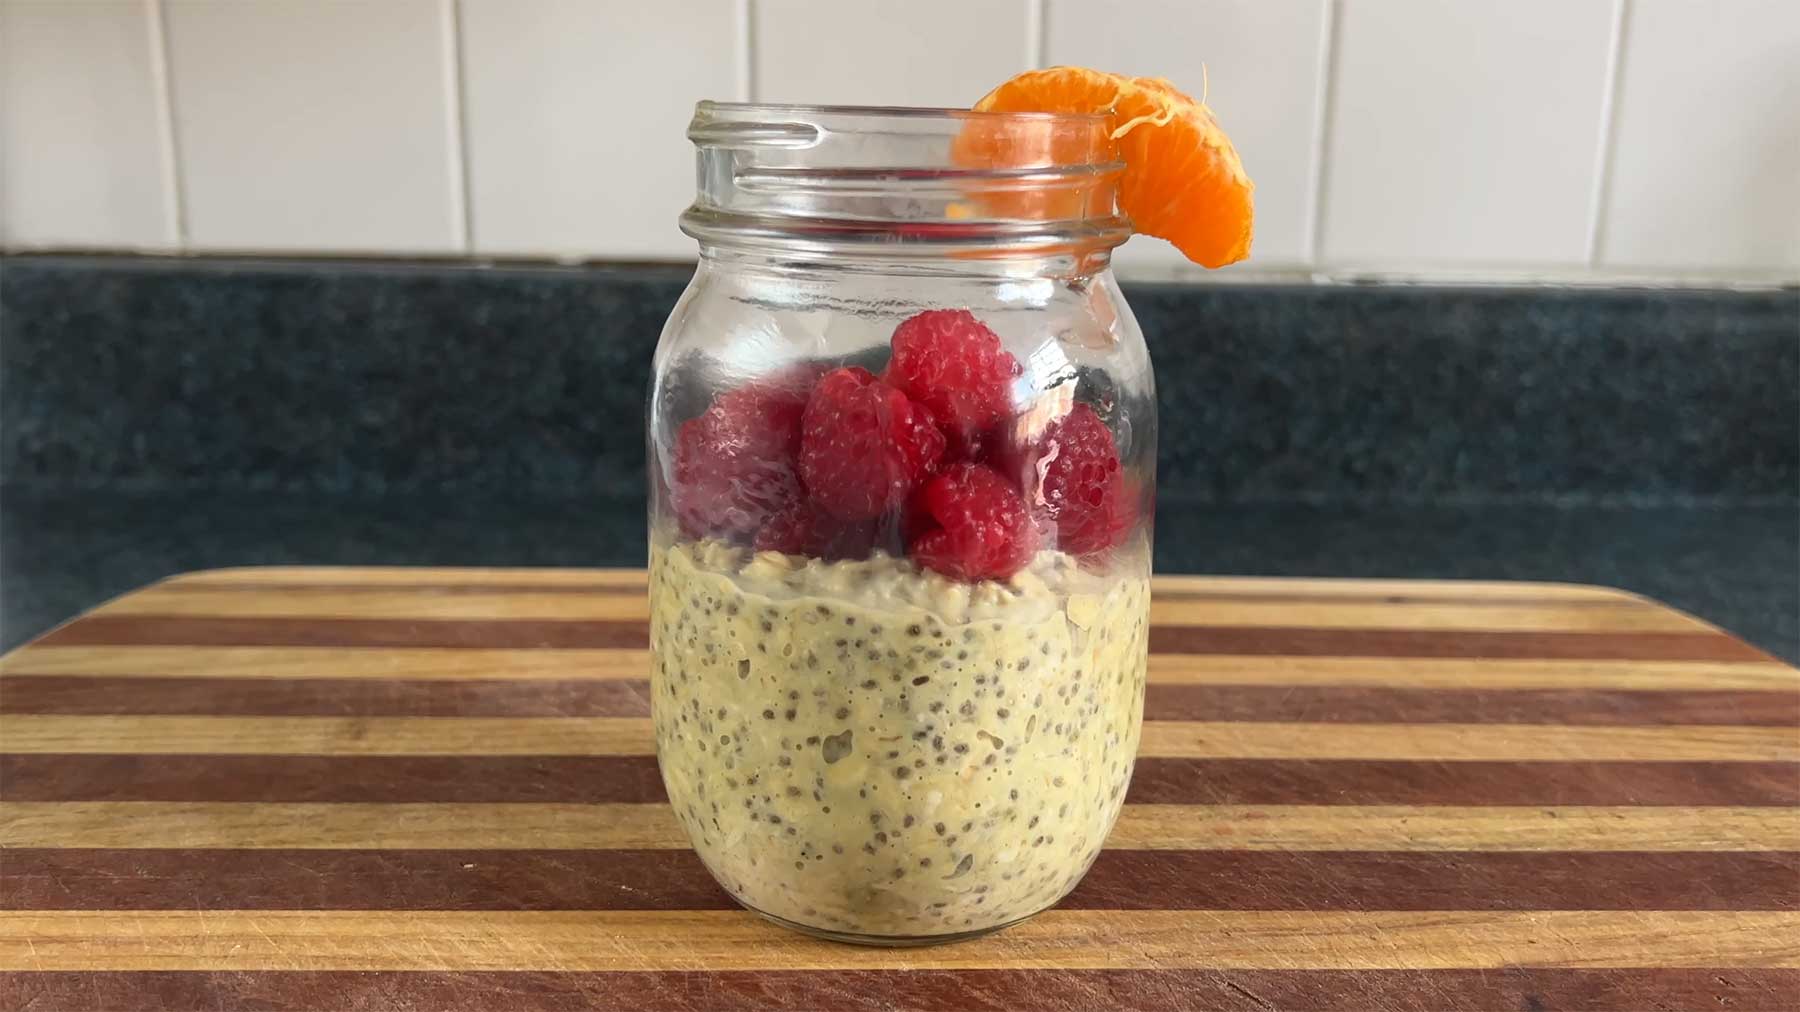 You Suck at Cooking - Overnight Oats (Episode 140) overnight-oats-you-suck-at-cooking 